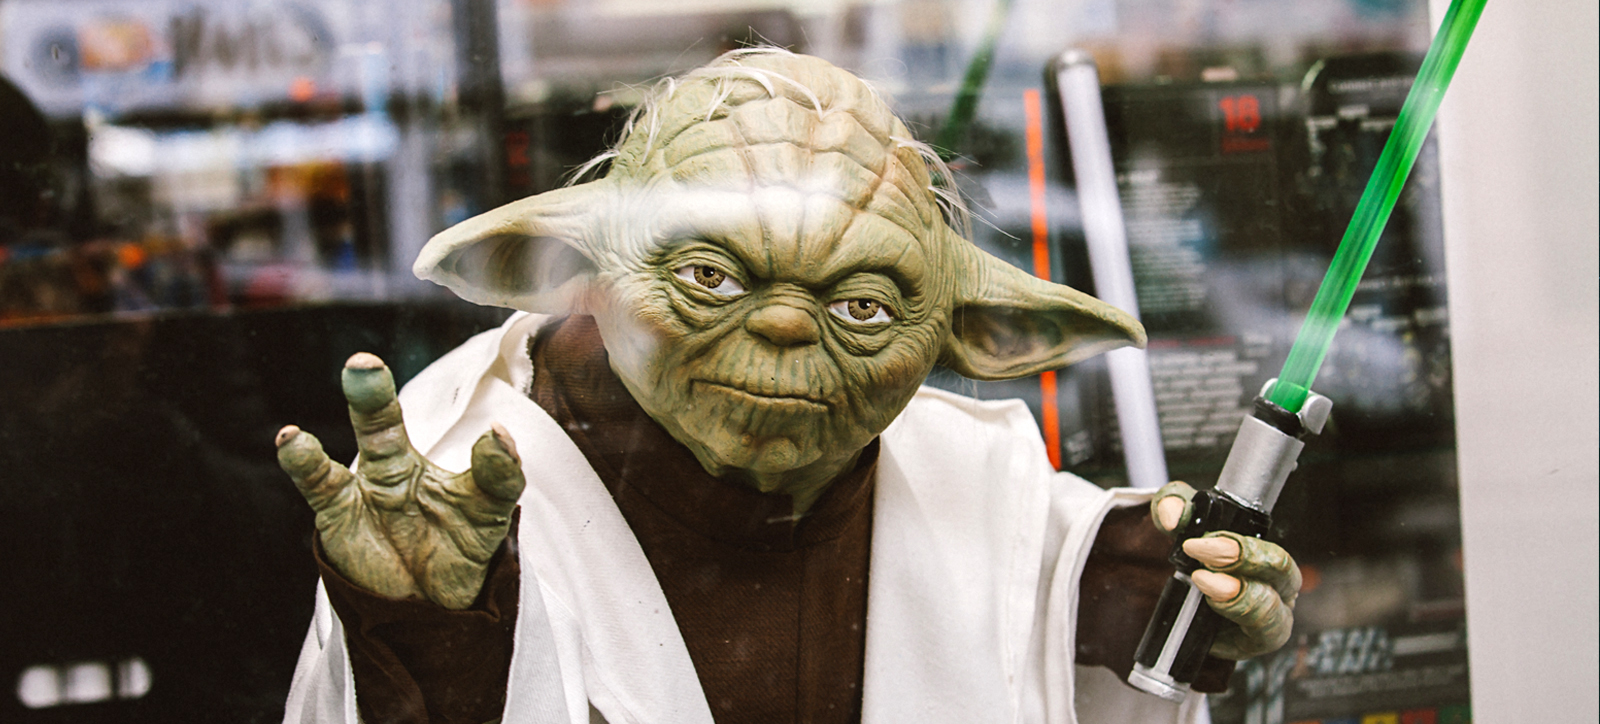 A portrait of Yoda from the iconic sci-fi franchise Star Wars.